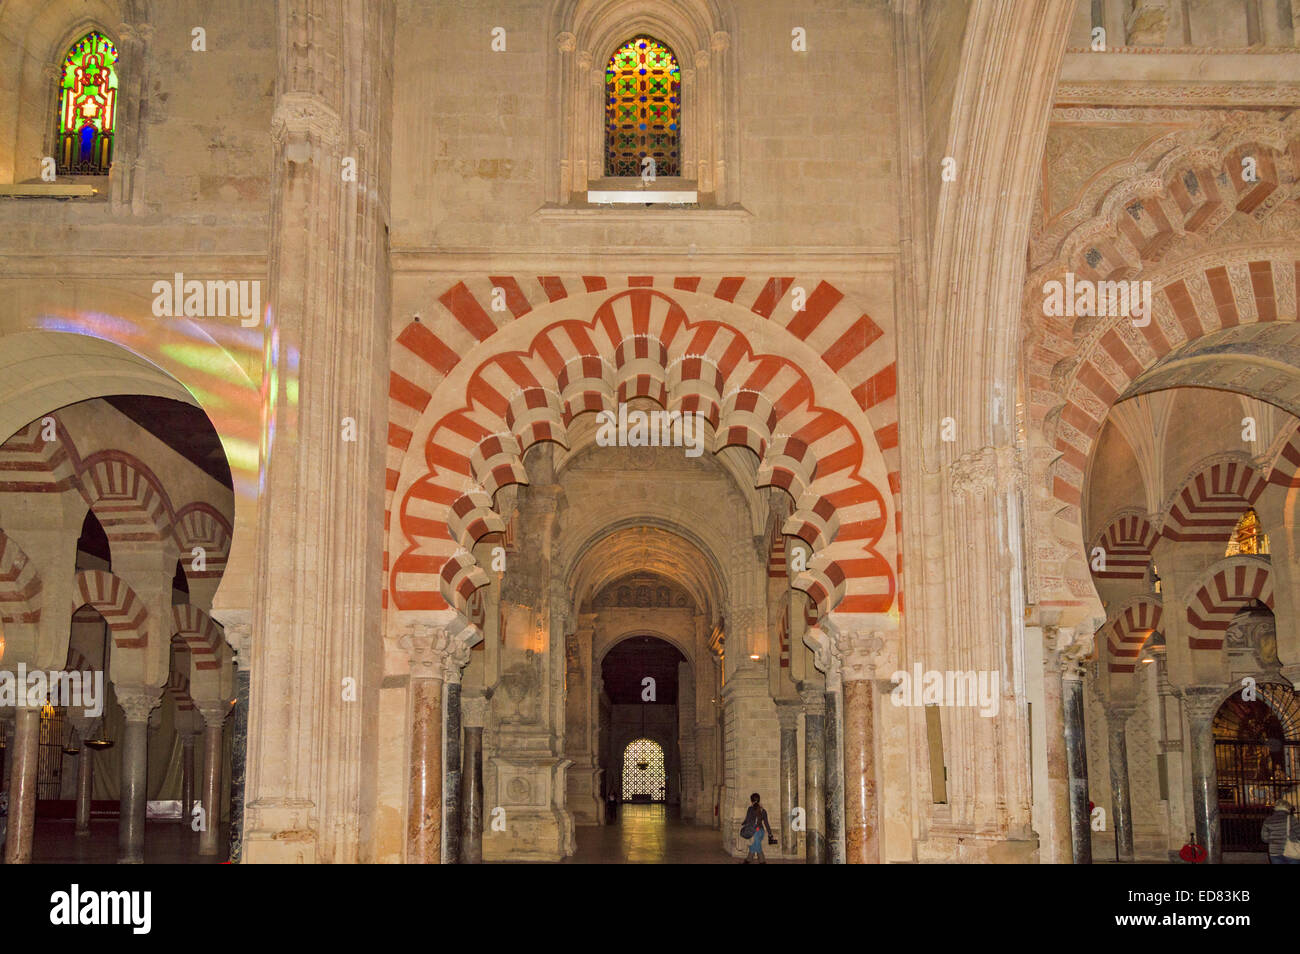 Cordoba Interior Mosque Cathedral Arches Of Red And White